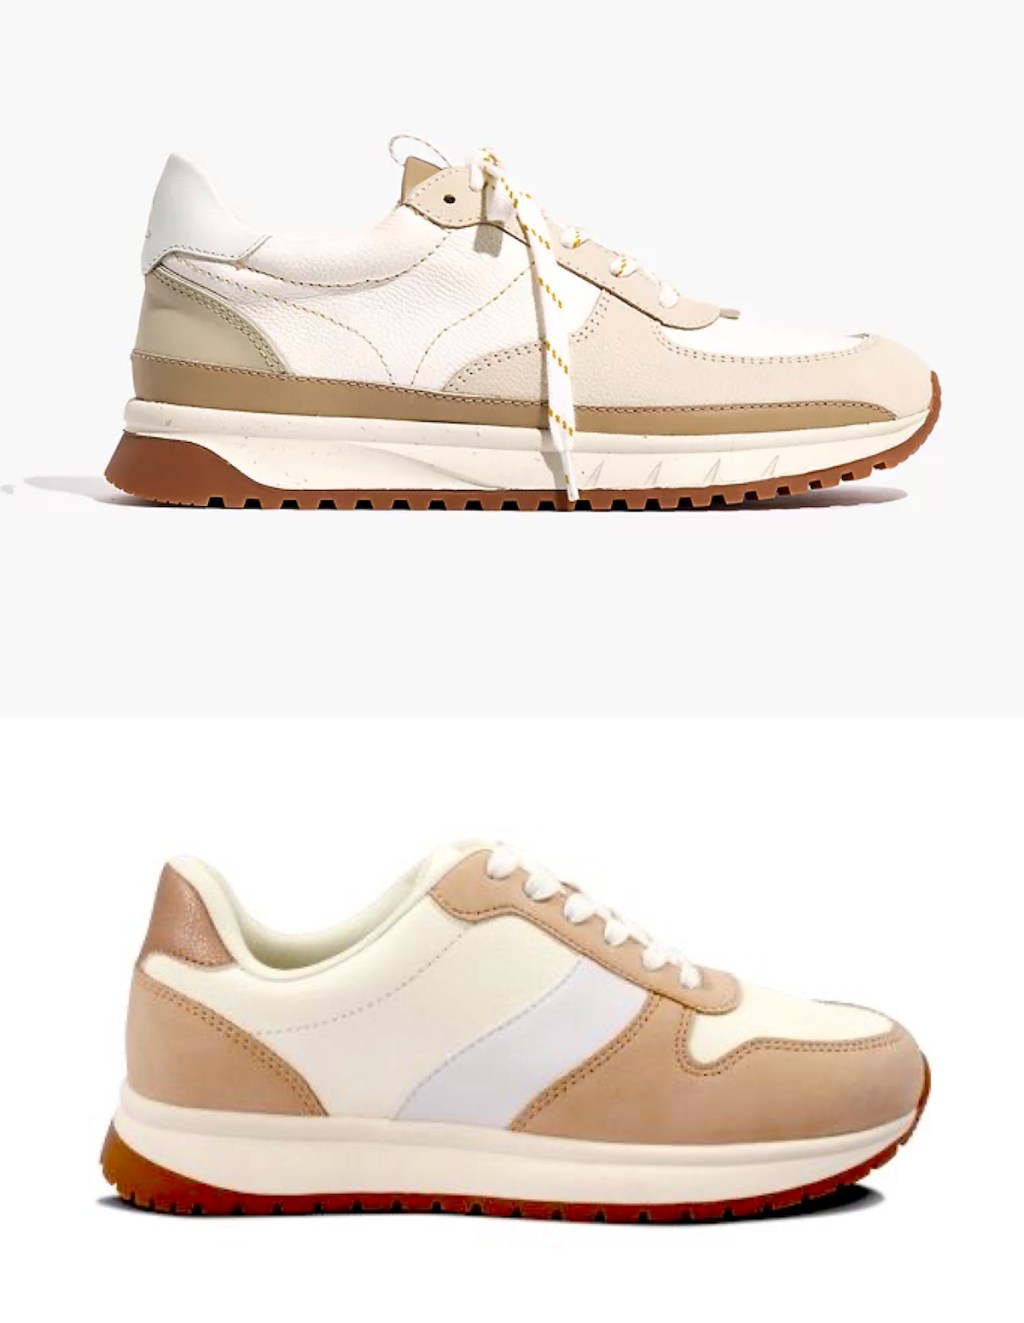 comparison between two stock photos of tan and white trainer sneakers